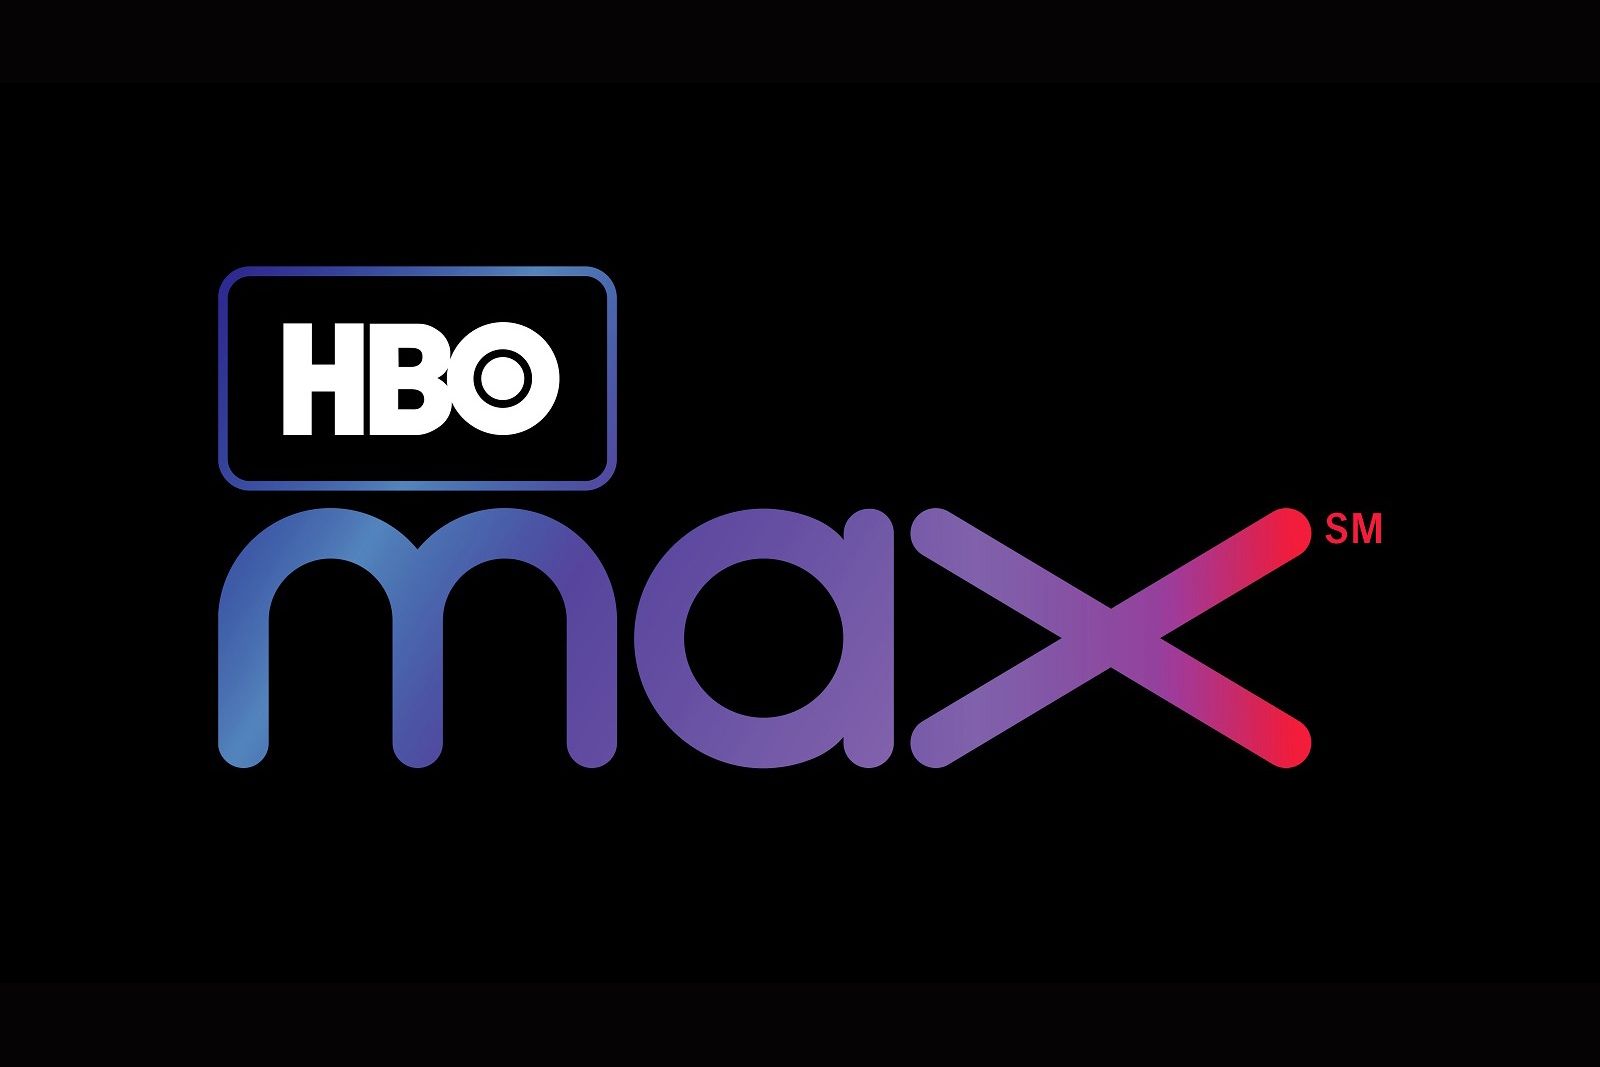 HBO Max: Here's how much it costs after price hike